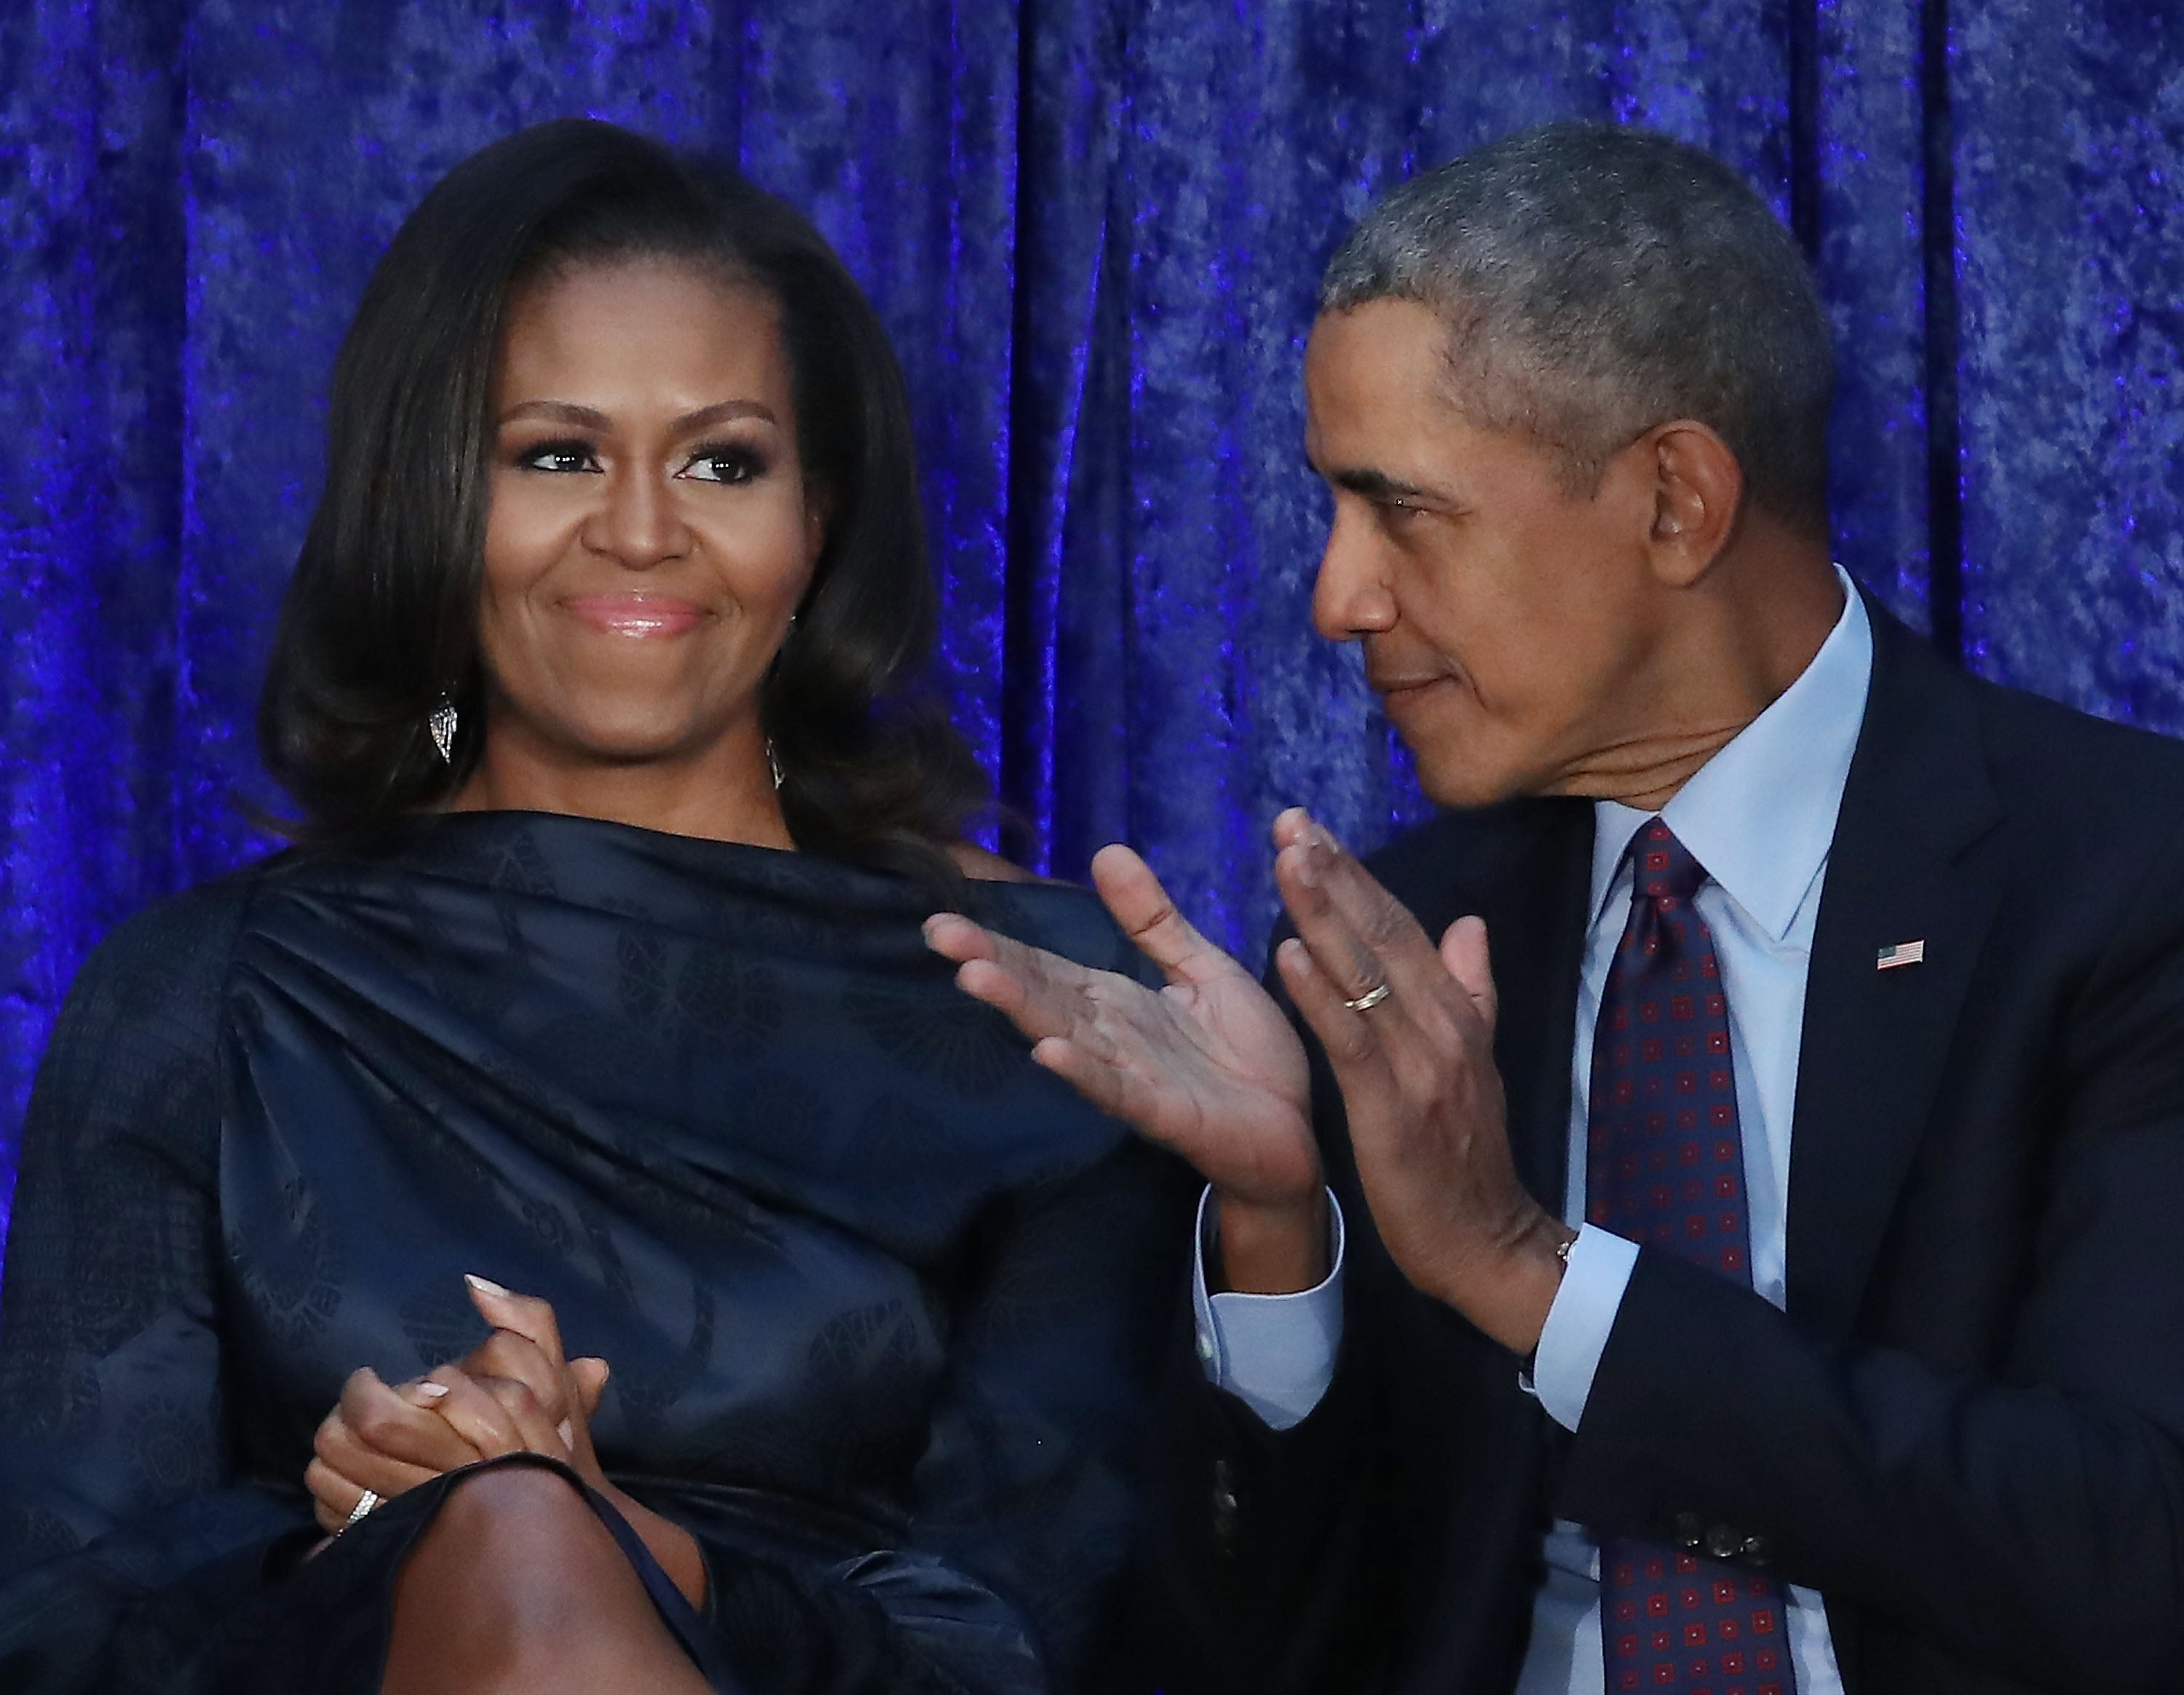 15 Beauty Shots Of Michelle Obama That Remind Us Why She’s The Baddest FLOTUS